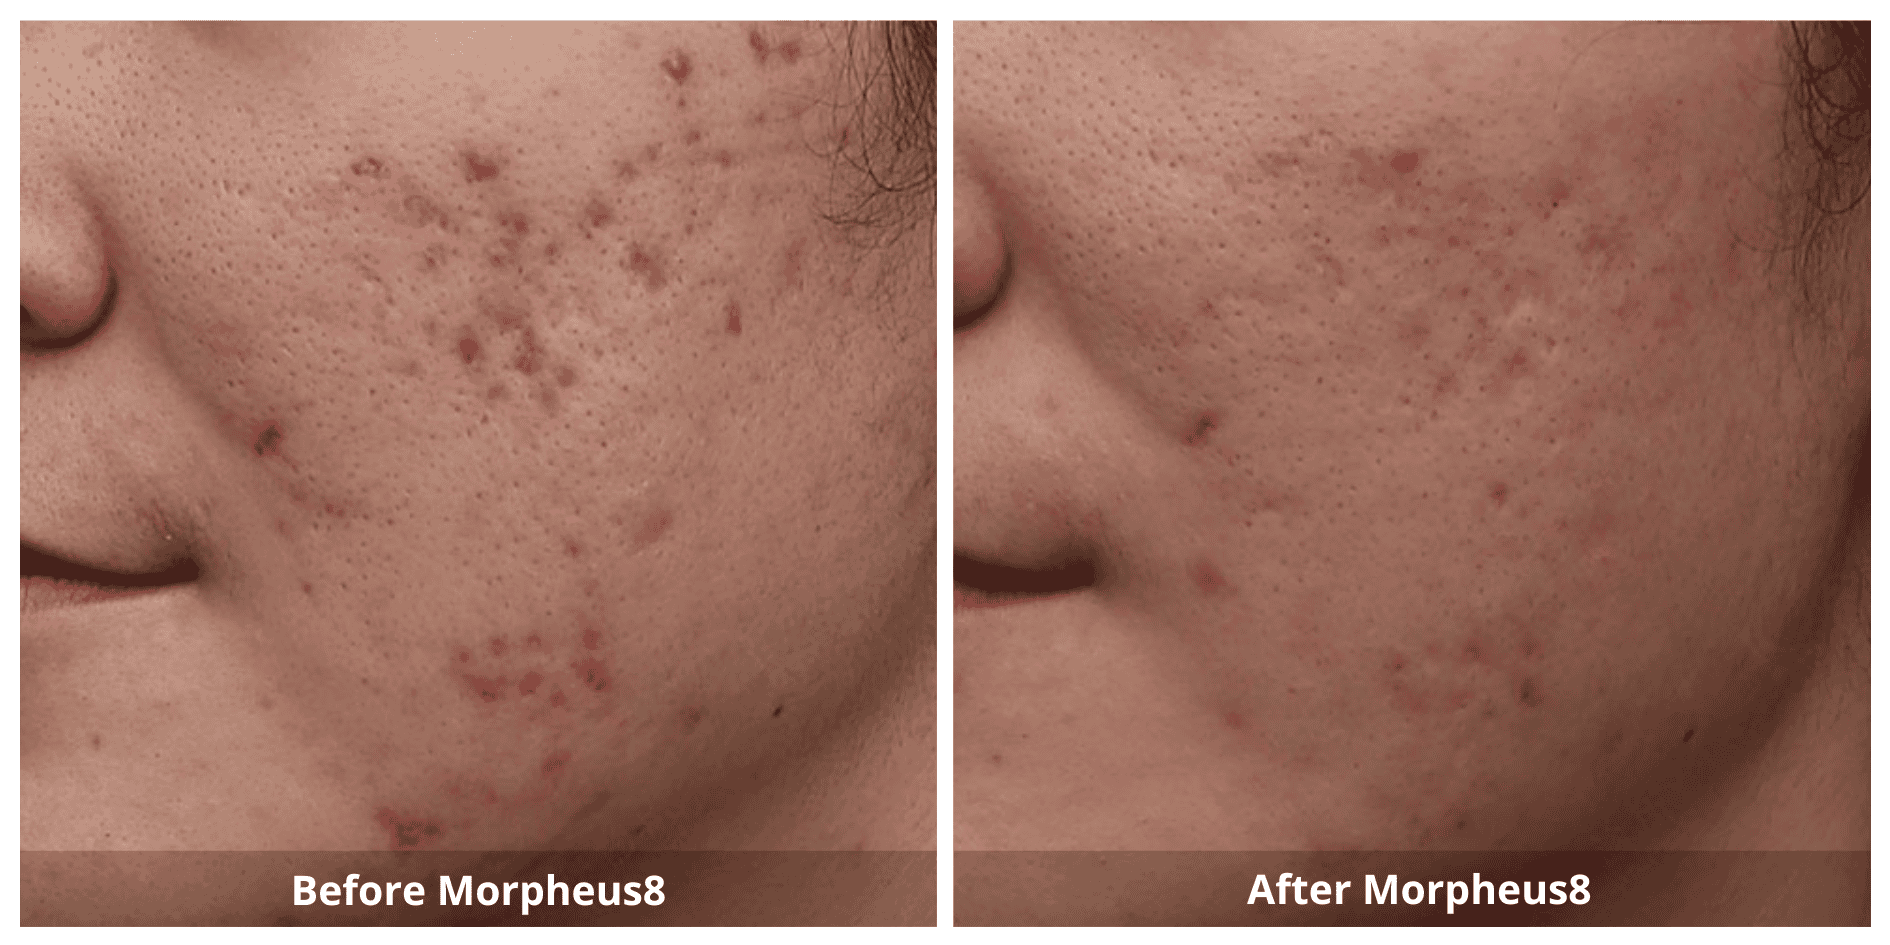 Morpheus8 Acne Scars Treatment Before and After photo